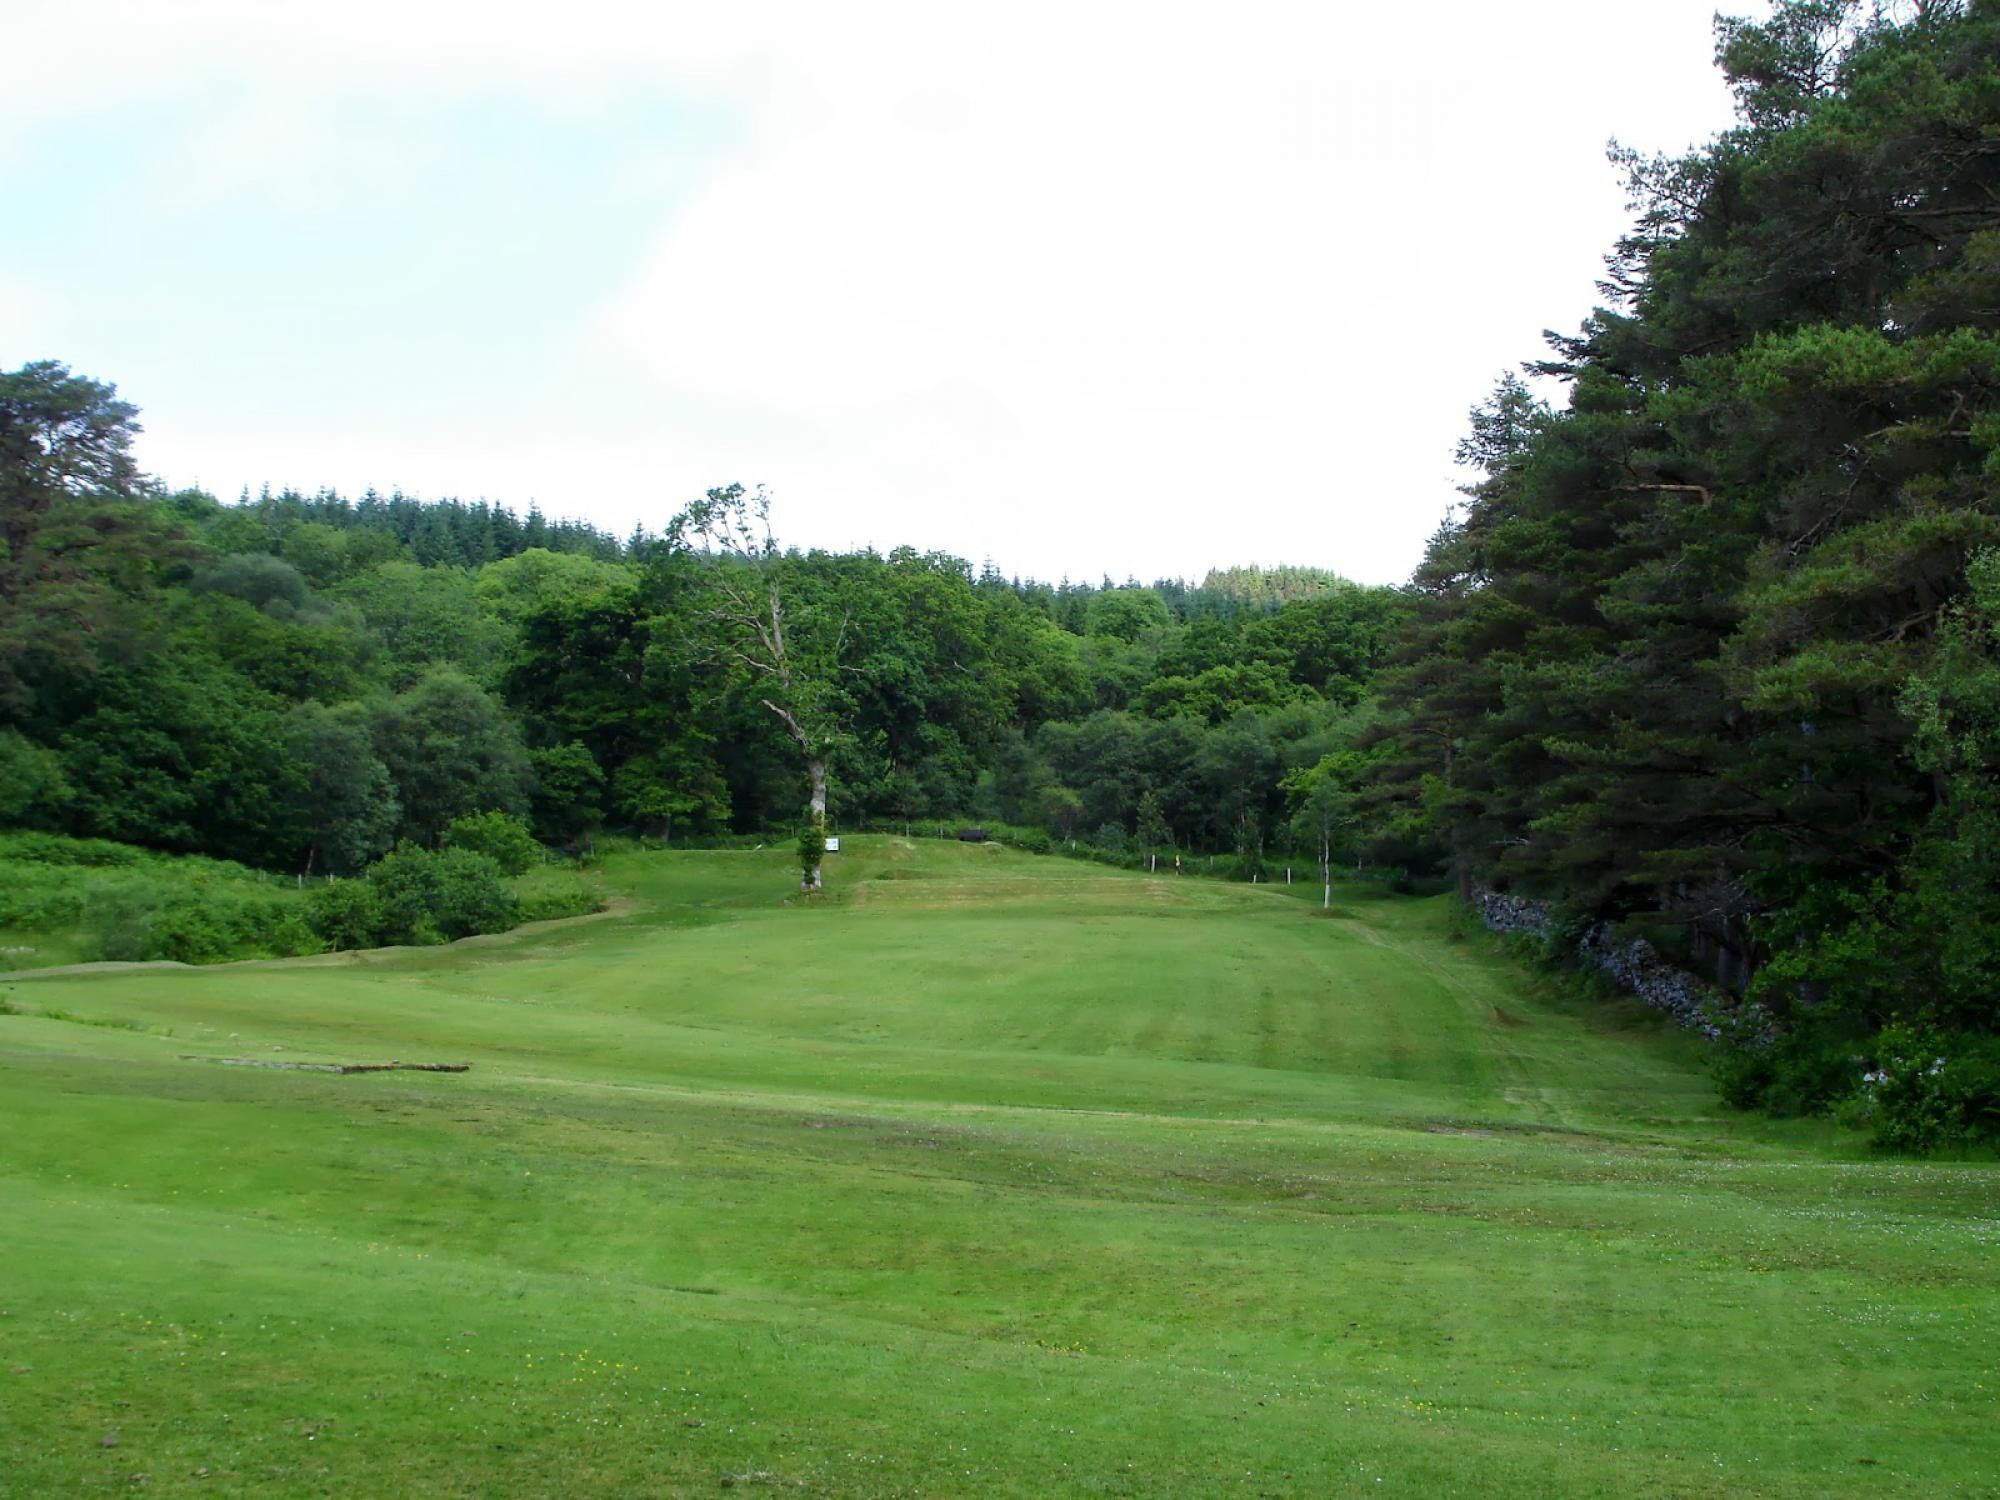 View Tarbert Golf Club's impressive golf course situated in dazzling Scotland.